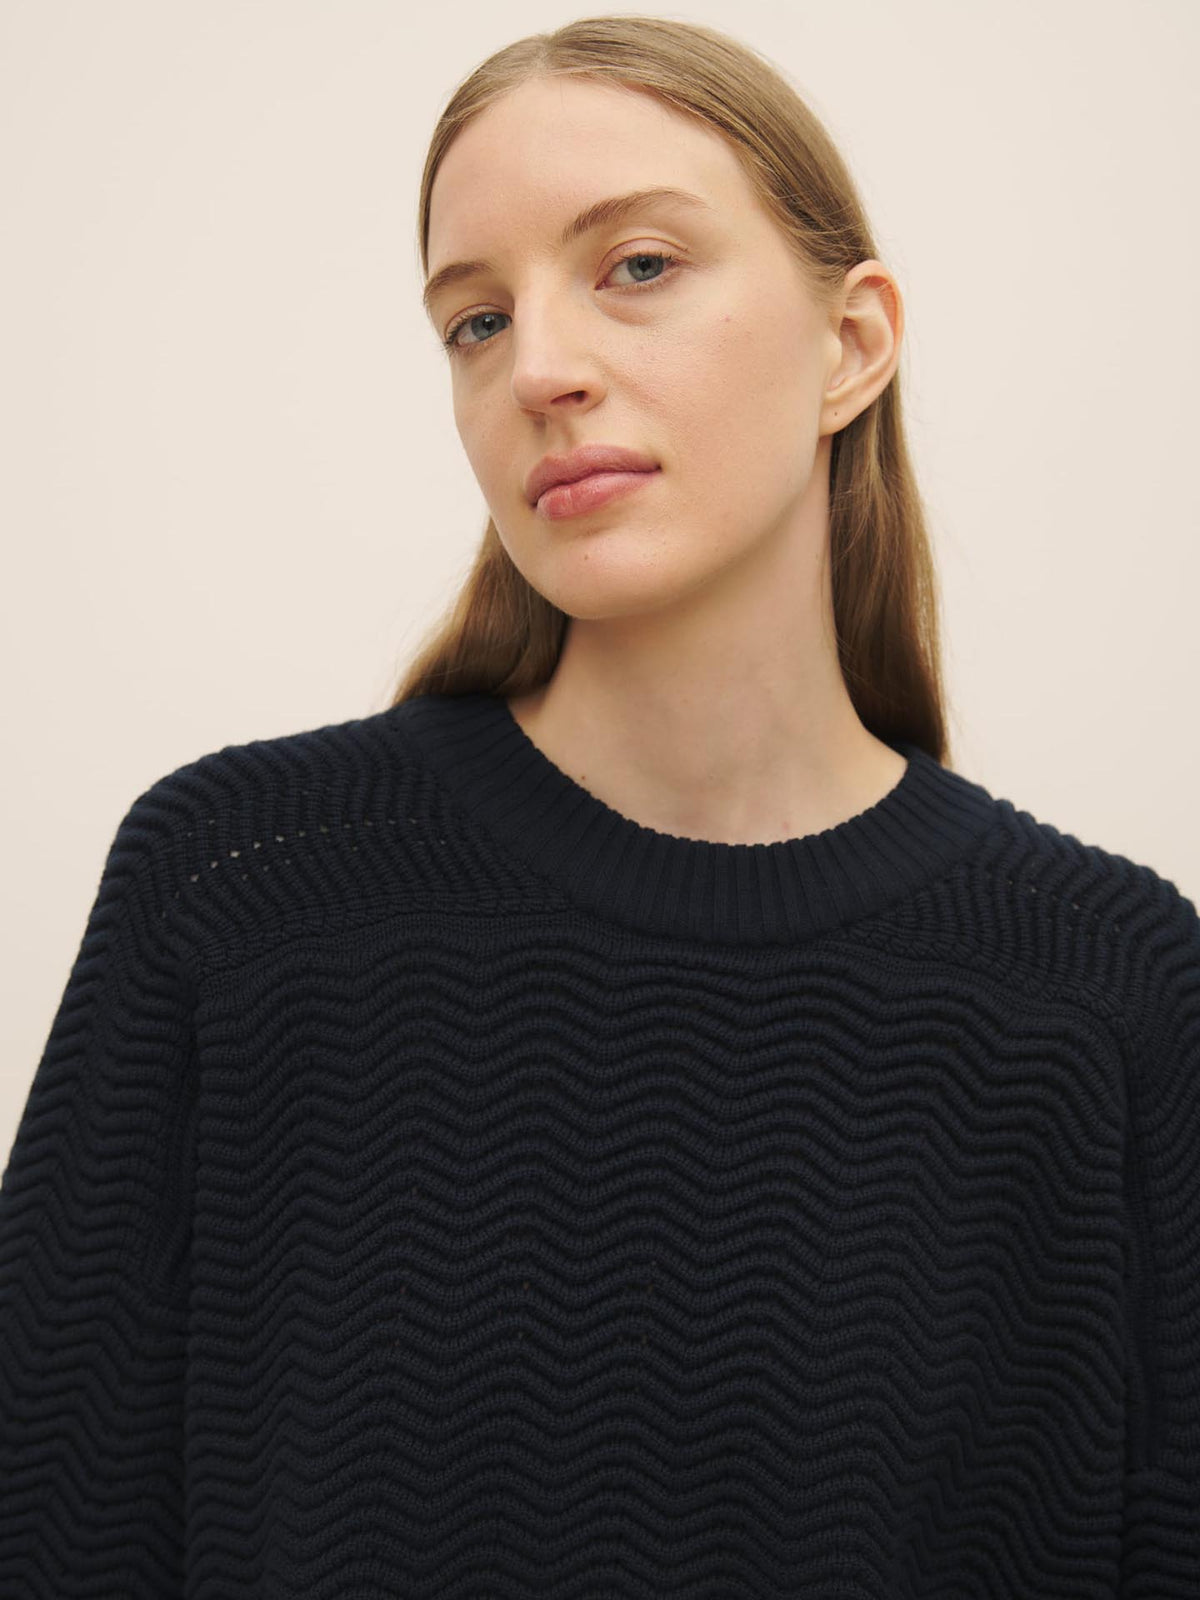 A woman with light brown hair wearing a Kowtow Zig Zag Crew – Indigo sweater, facing the camera with a neutral expression.